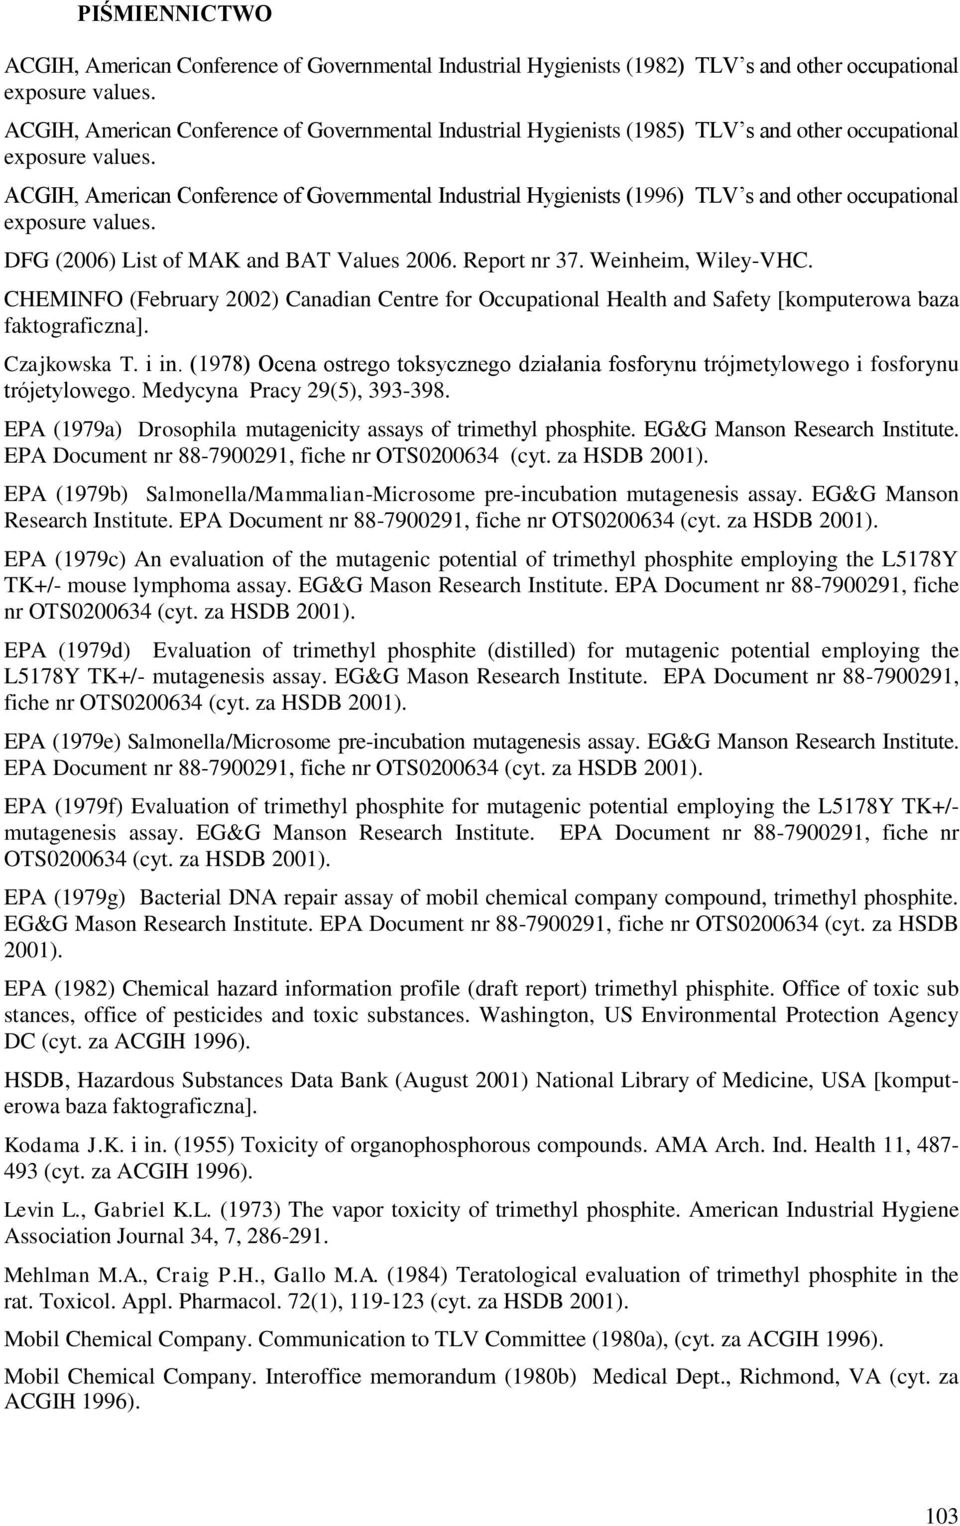 ACGIH, American Conference of Governmental Industrial Hygienists (1996) TLV s and other occupational exposure values. DFG (2006) List of MAK and BAT Values 2006. Report nr 37. Weinheim, Wiley-VHC.